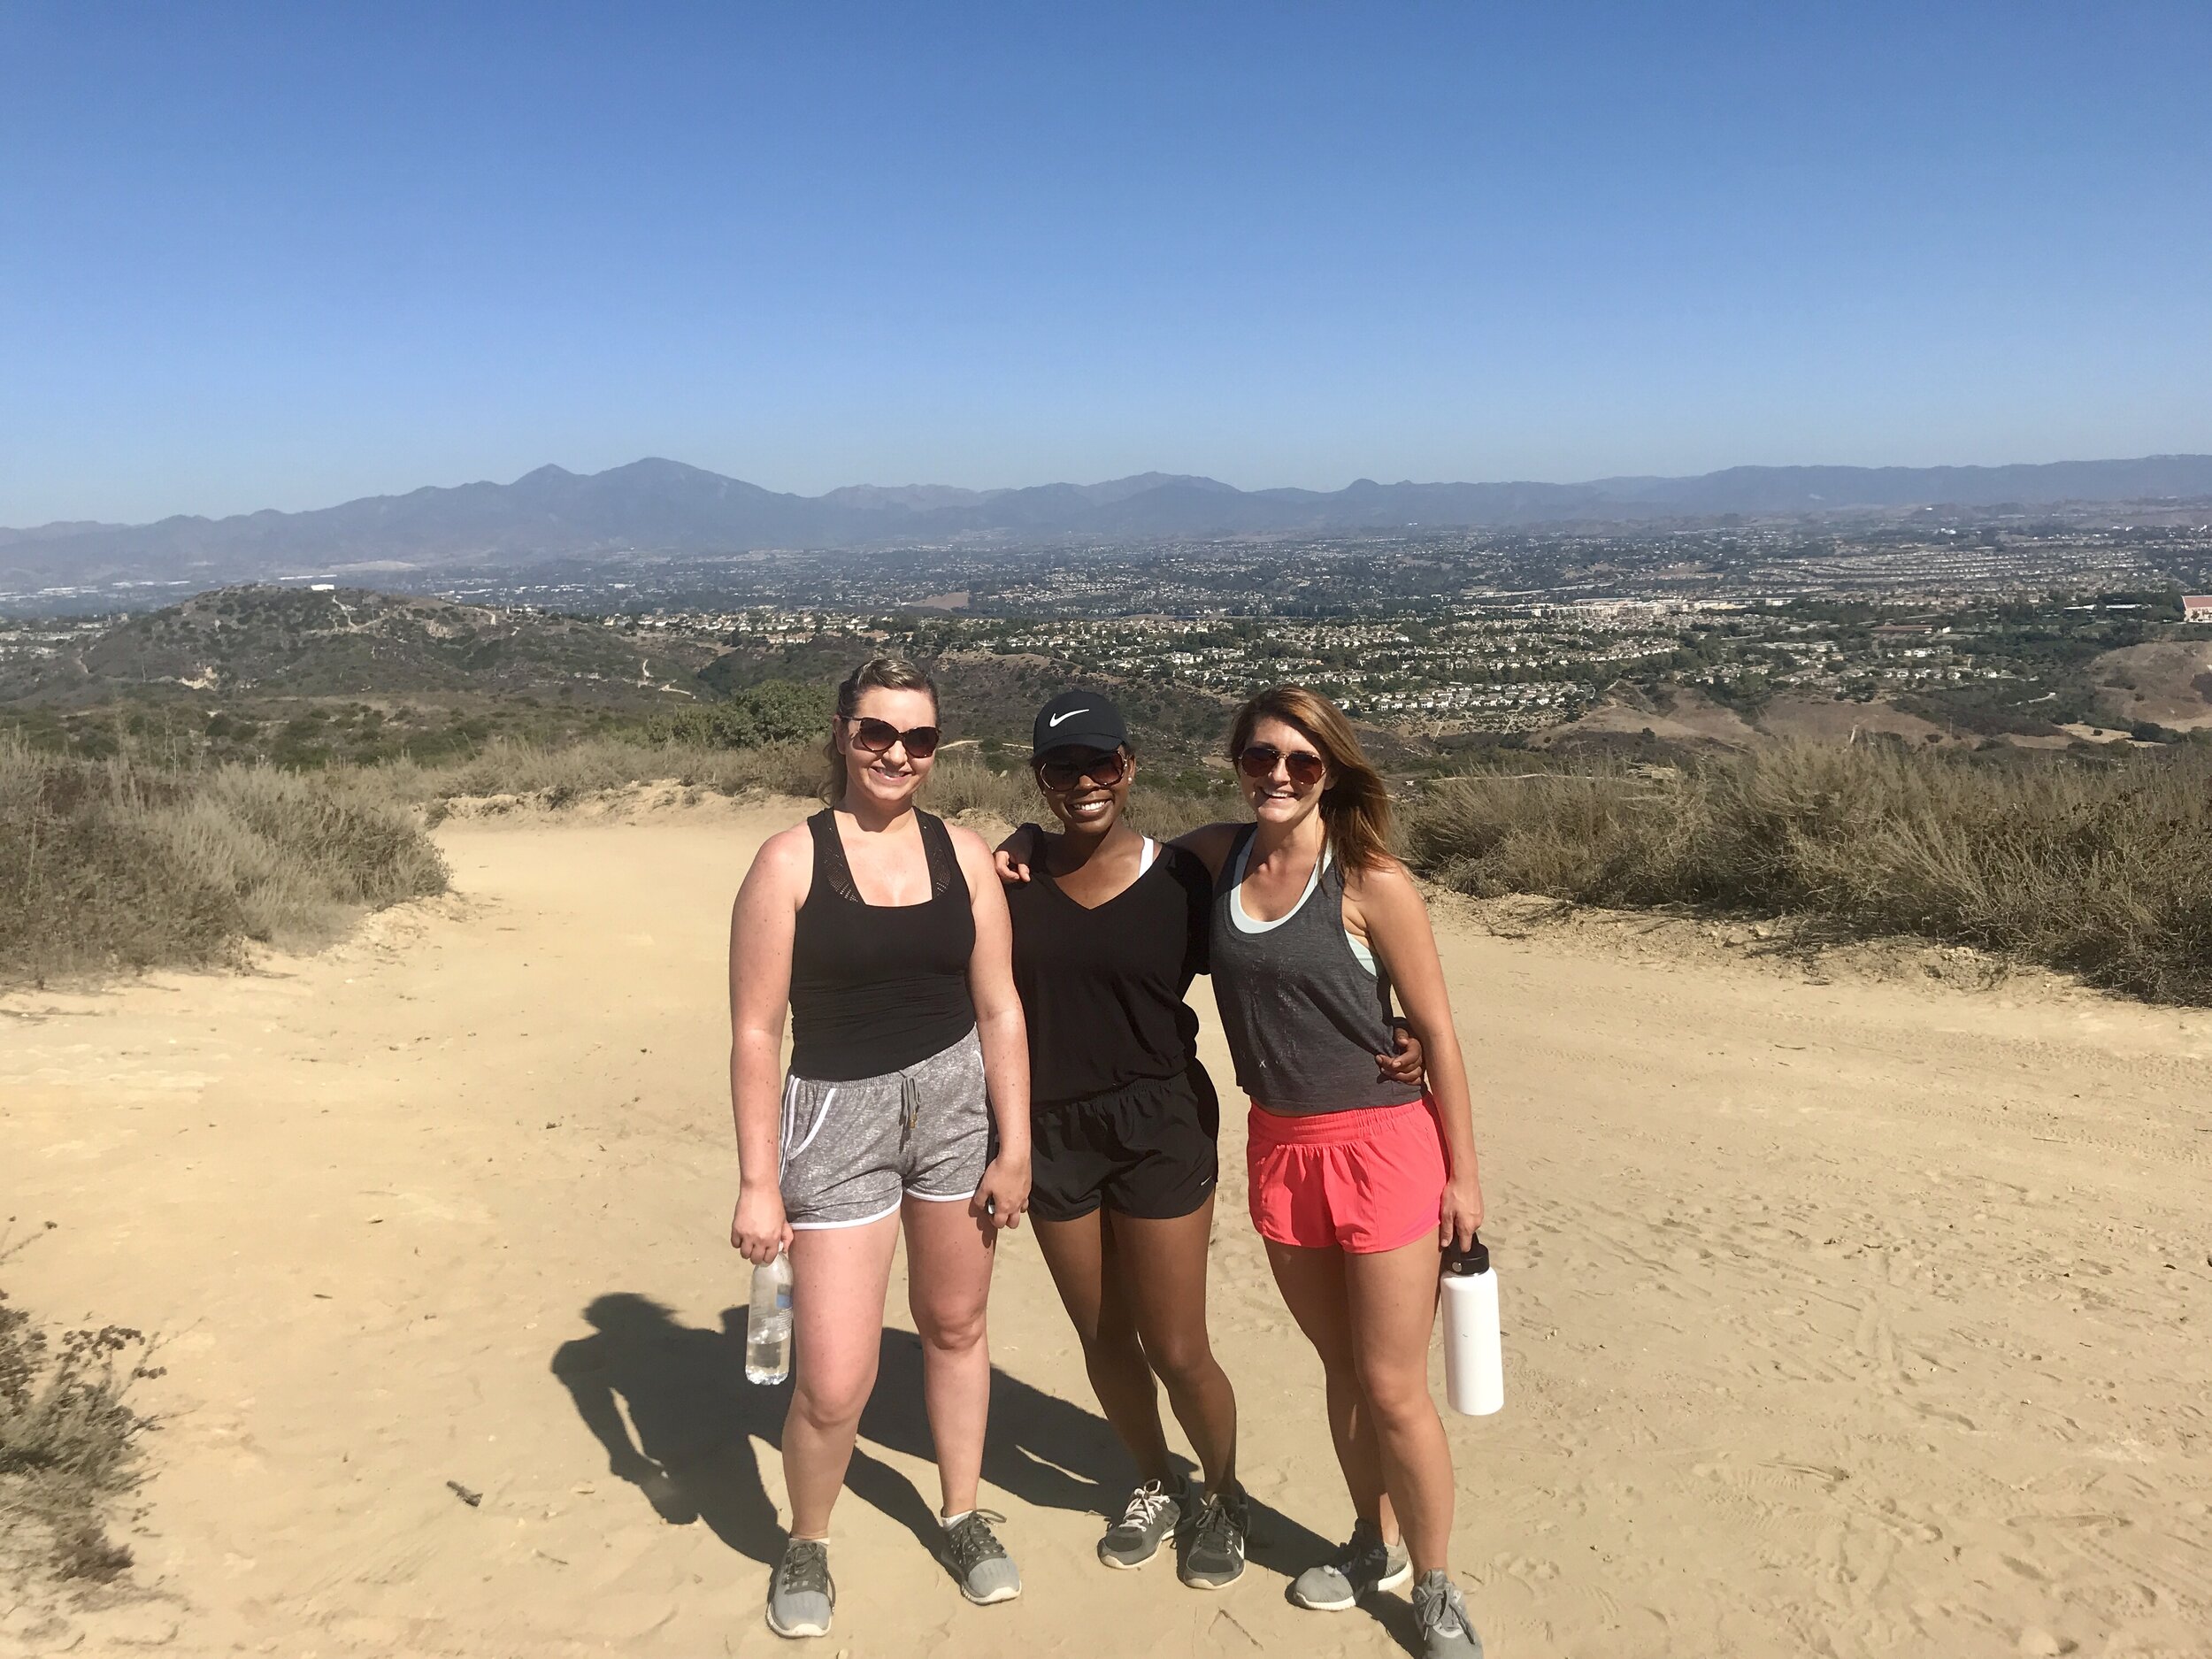  During a hike of Laguna Beach, CA, Alyssa, Nikole and I connected and got to know one another better. 